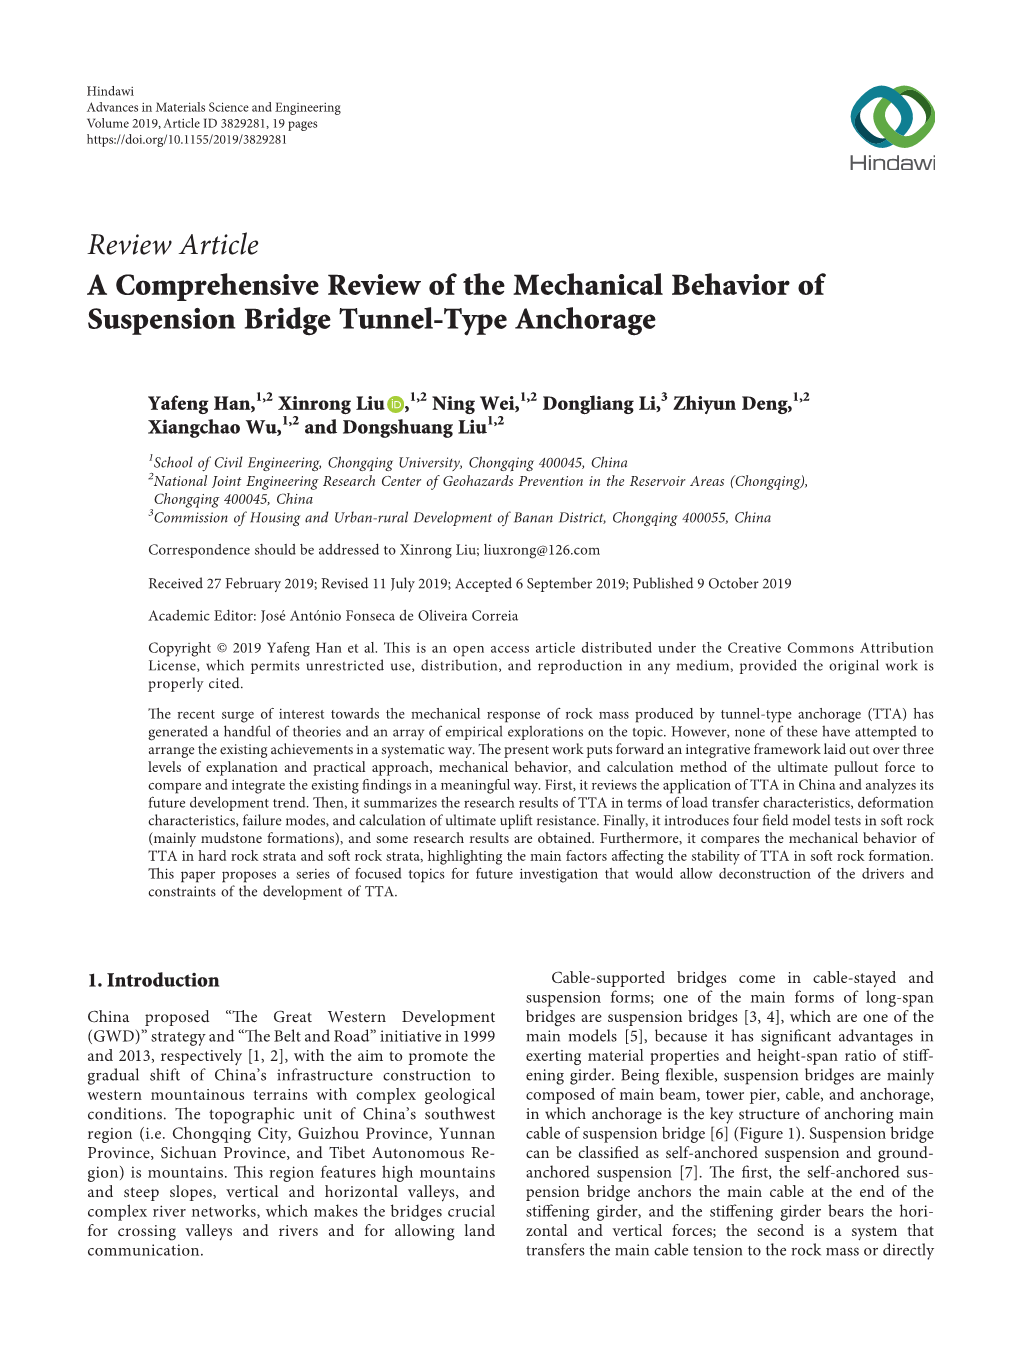 A Comprehensive Review of the Mechanical Behavior of Suspension Bridge Tunnel-Type Anchorage